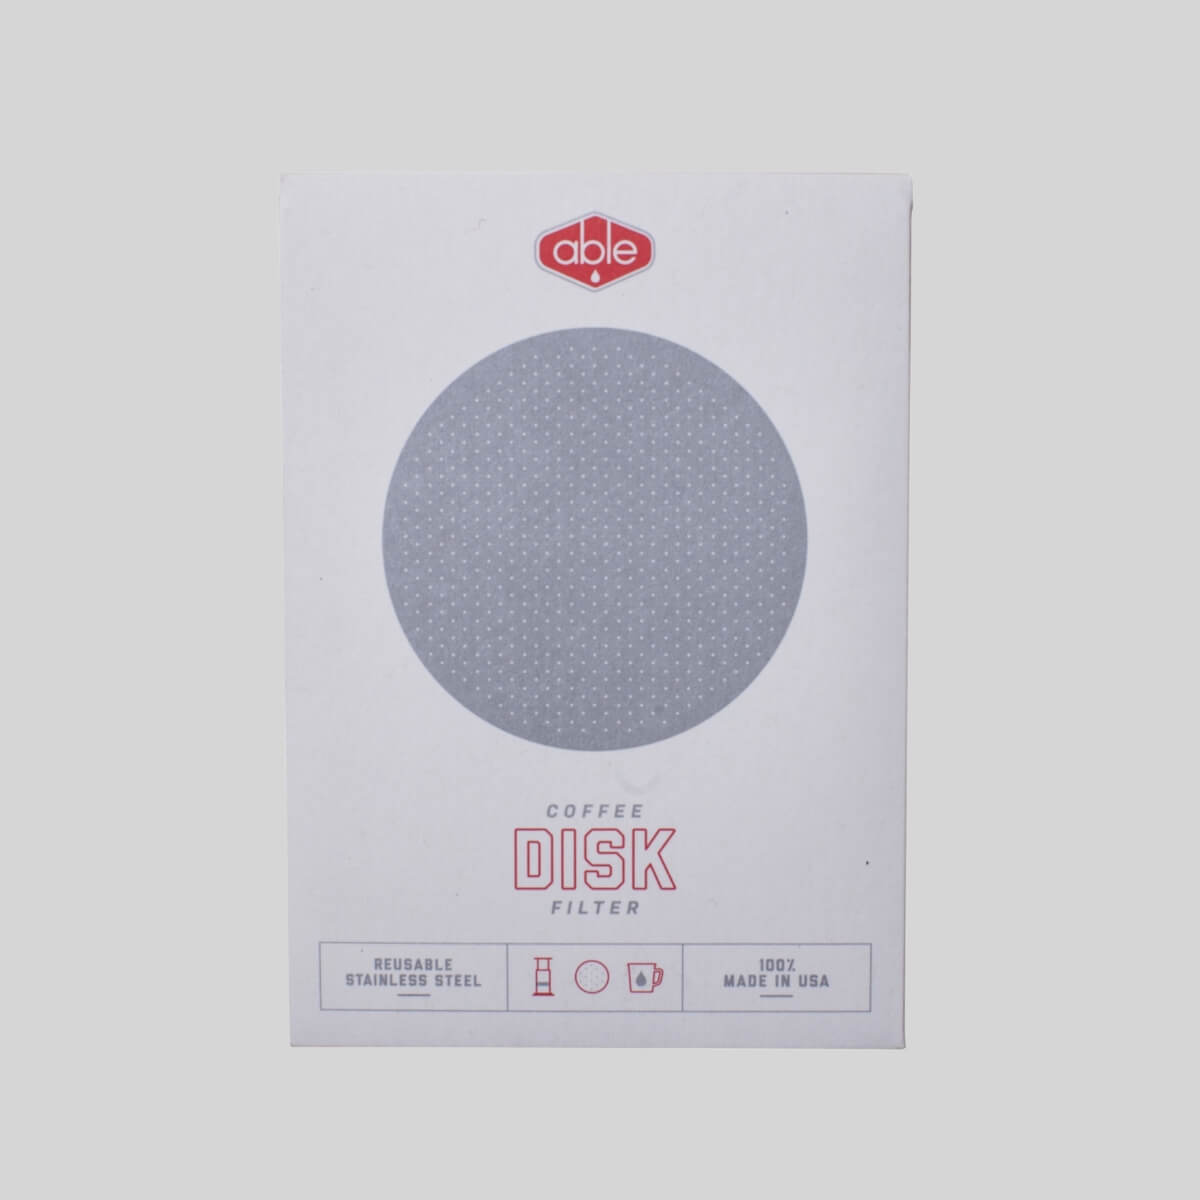 Able-AeroPress-Disk-Filter_RAW-Coffee-Company